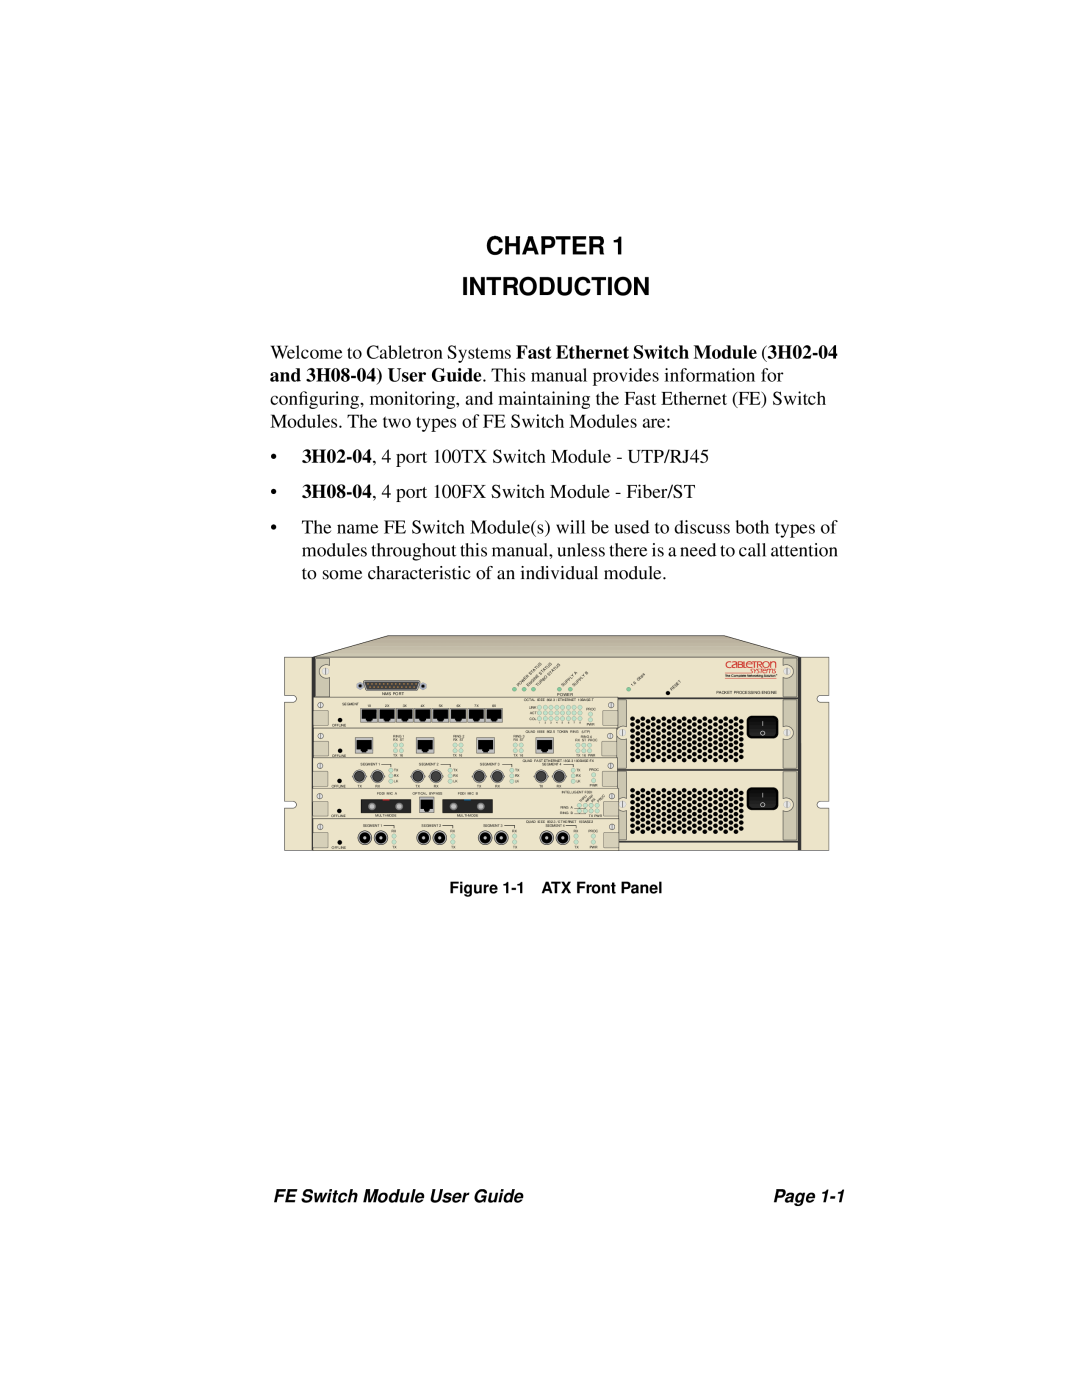 Cabletron Systems 3H08-04, 3H02-04 manual Chapter Introduction 